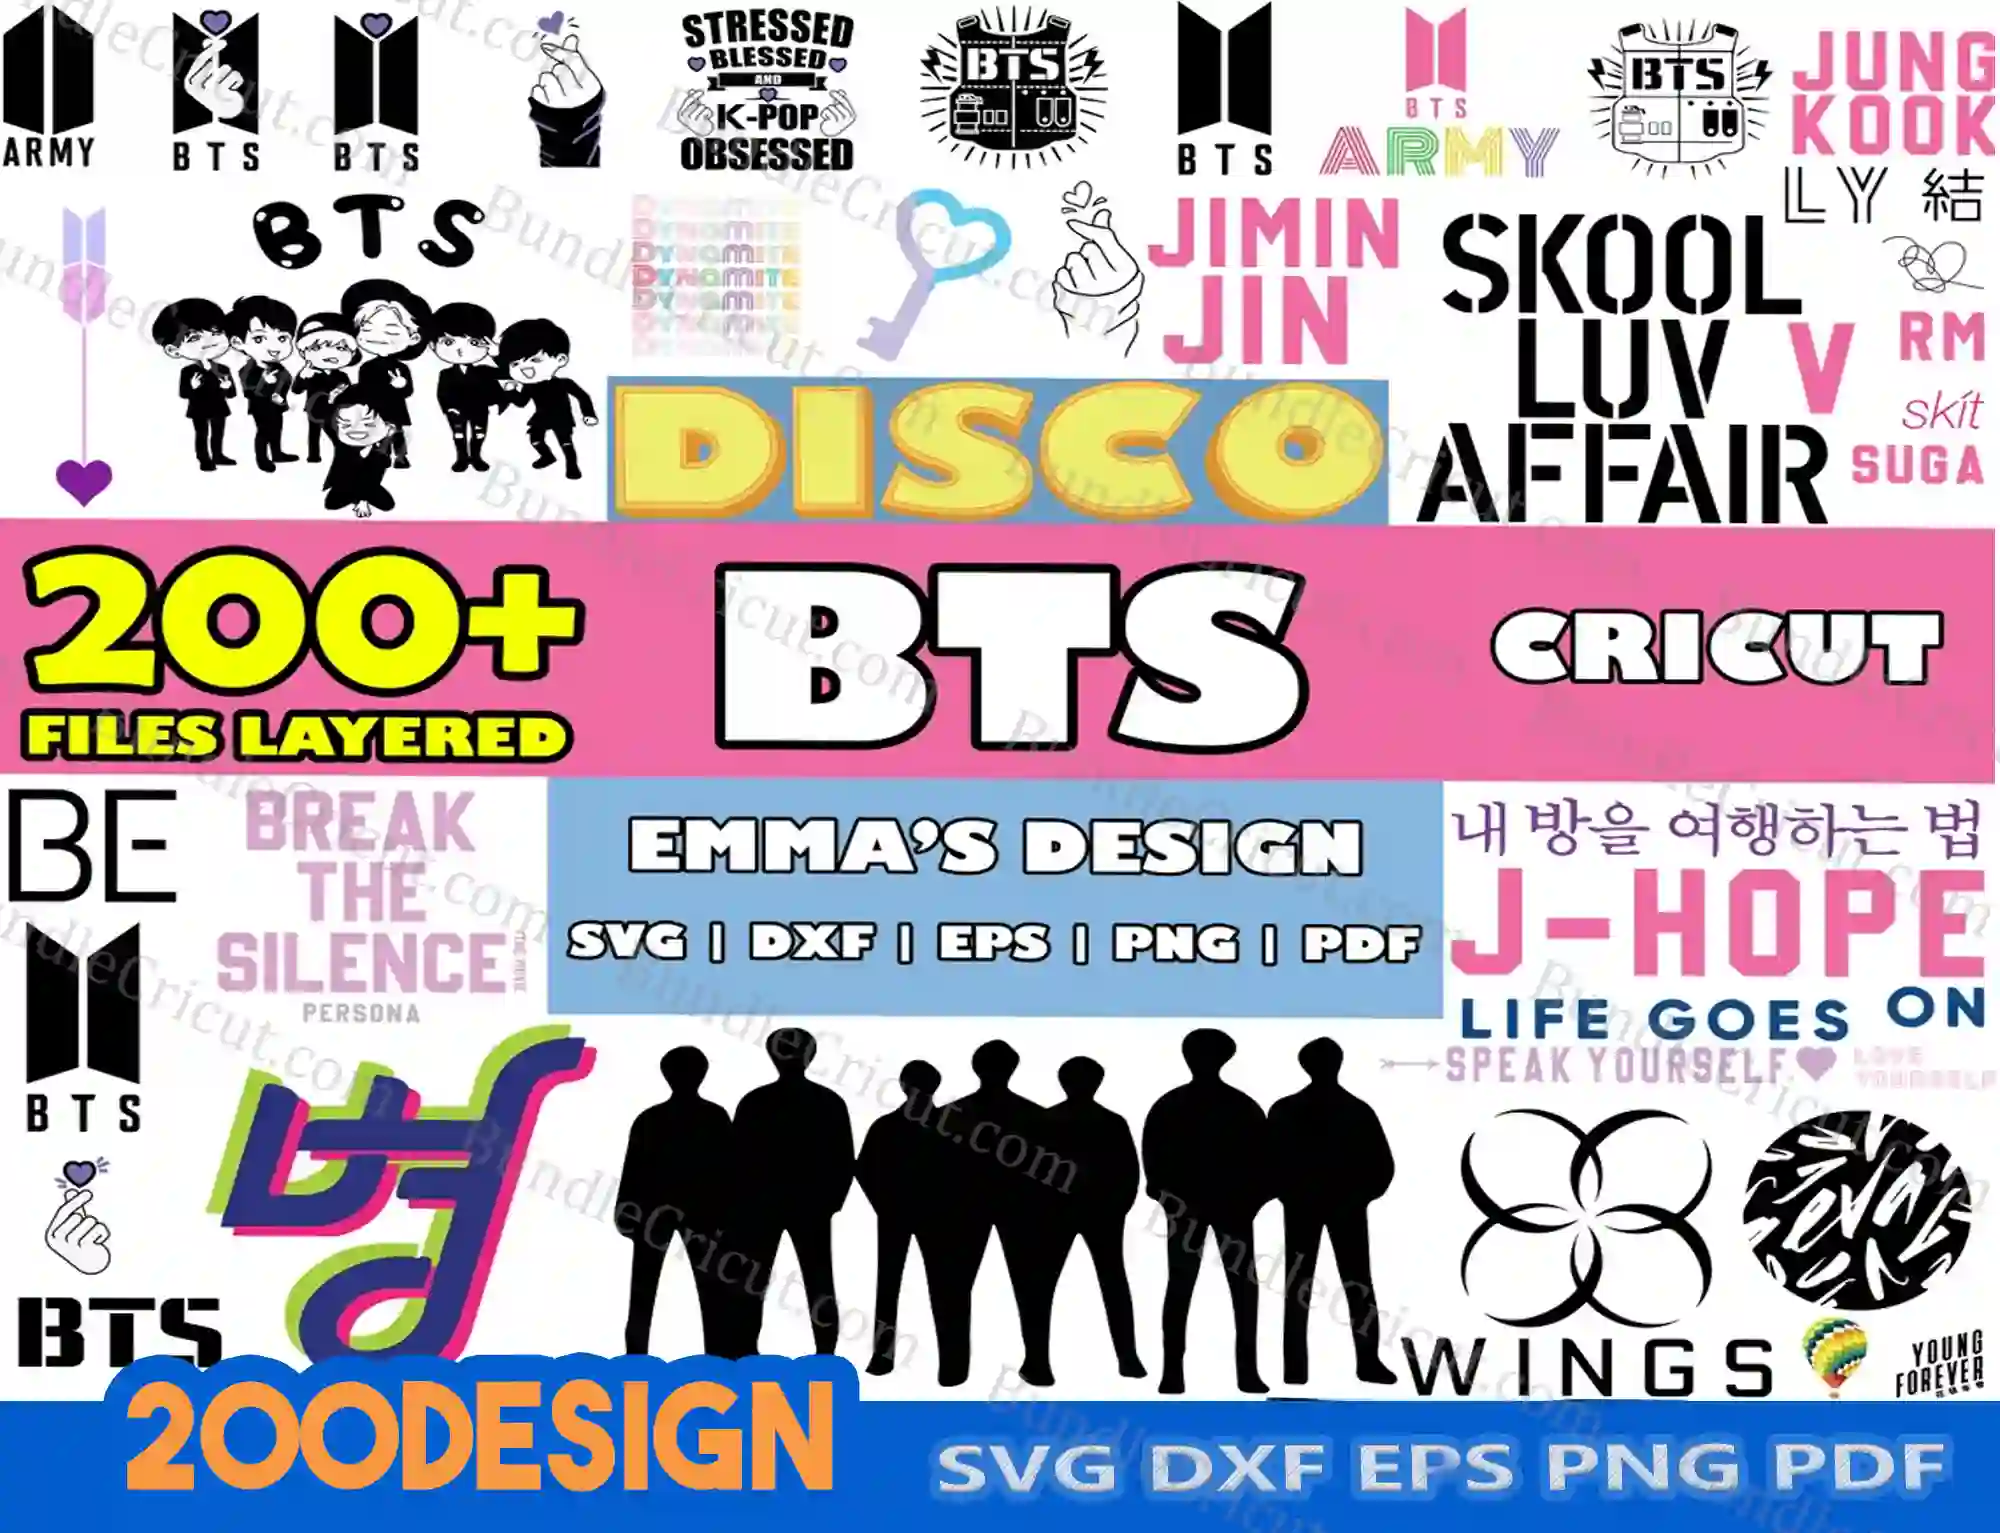 Pack of free Kpop stickers (SVG, PNG)